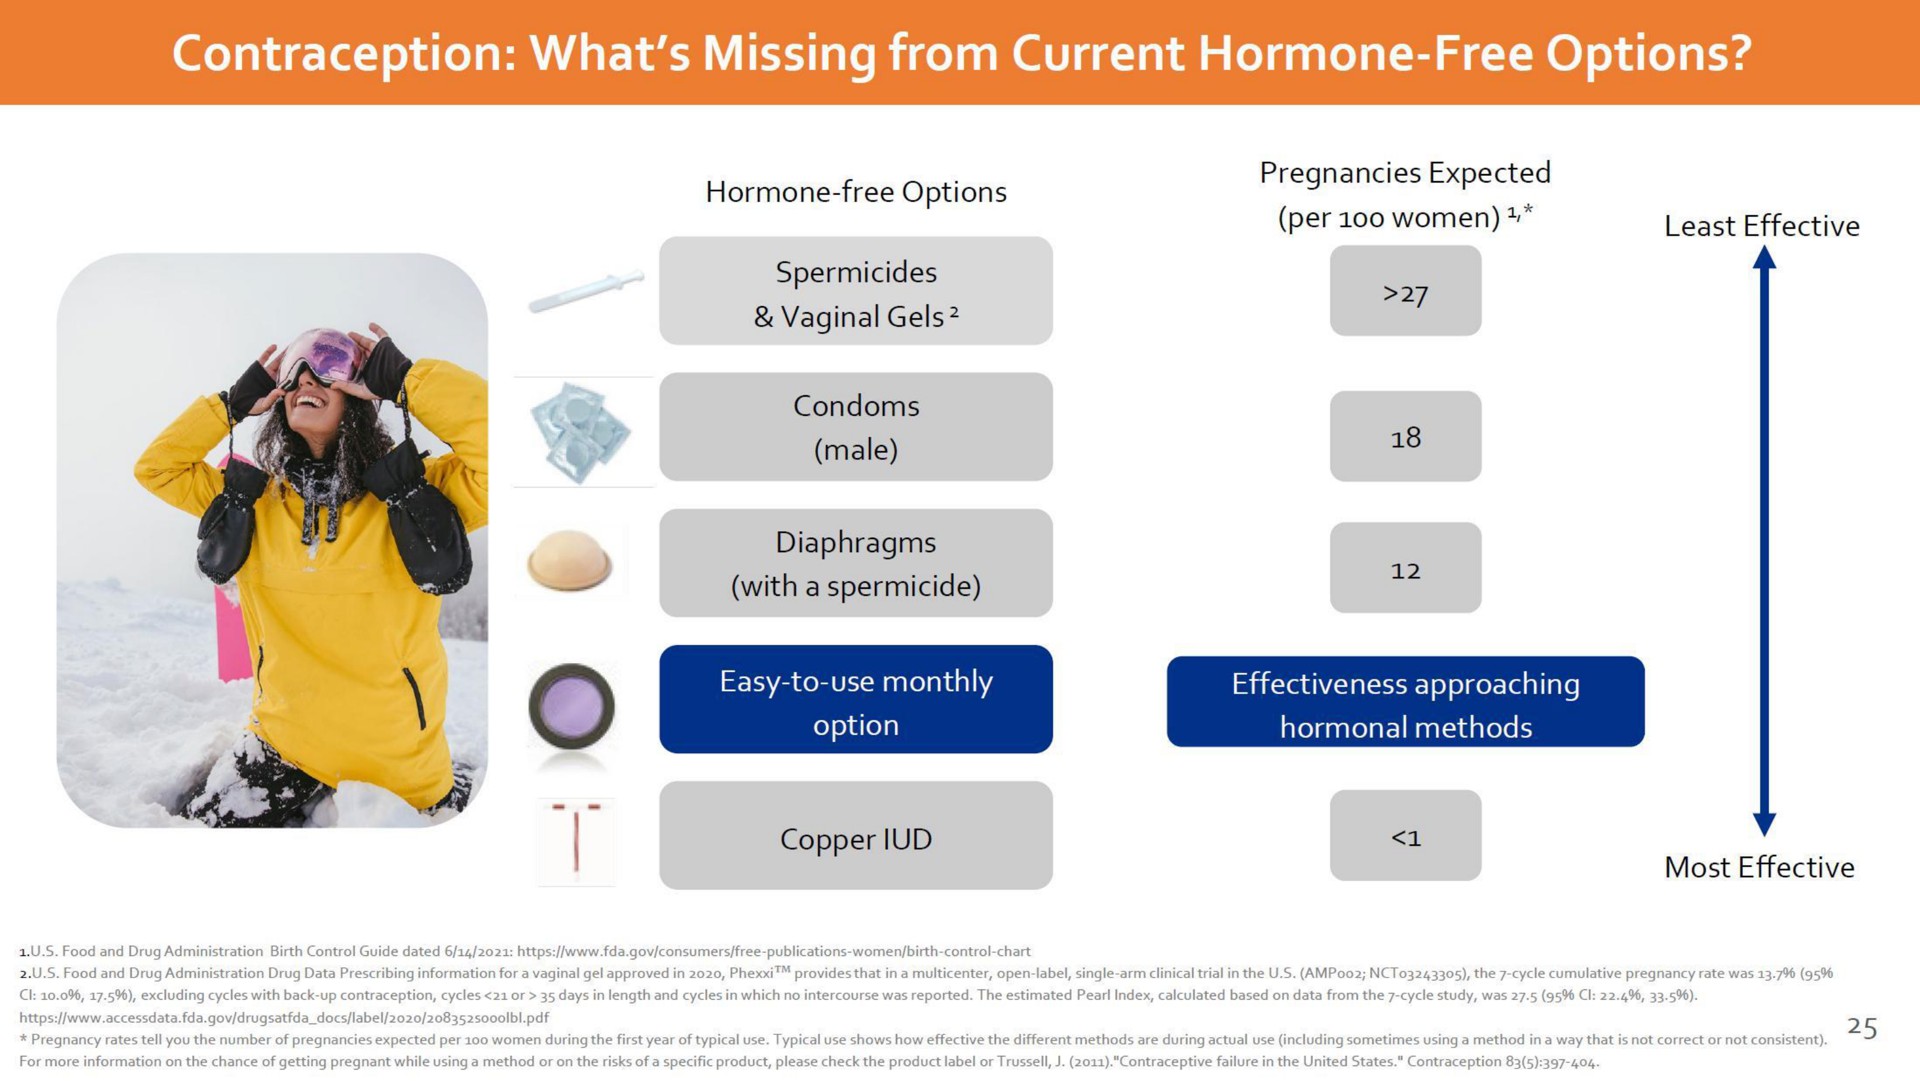 contraception what missing from current hormone free options | Dare Bioscience